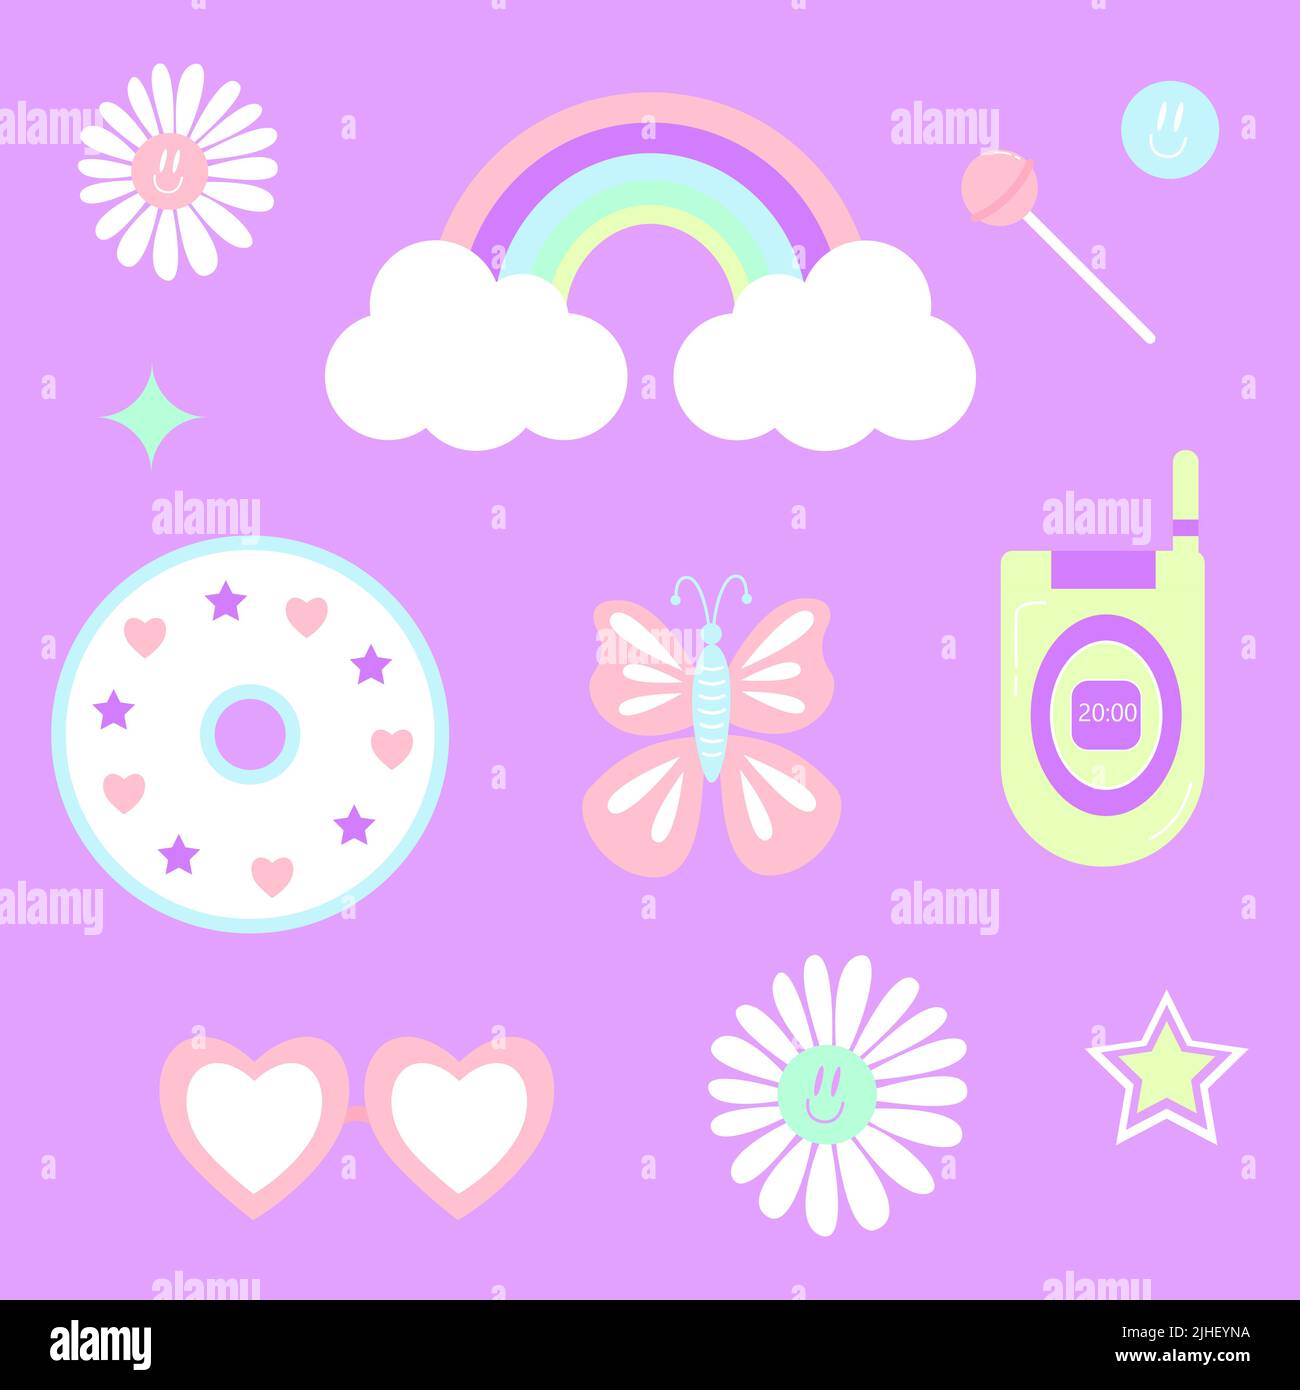 2000 psychedelic set stickers. Trippy daisies, rainbow, lollypop, butterfly, compact disc, old mobile phone, glasses-hearts, stars on purple backgroun Stock Vector